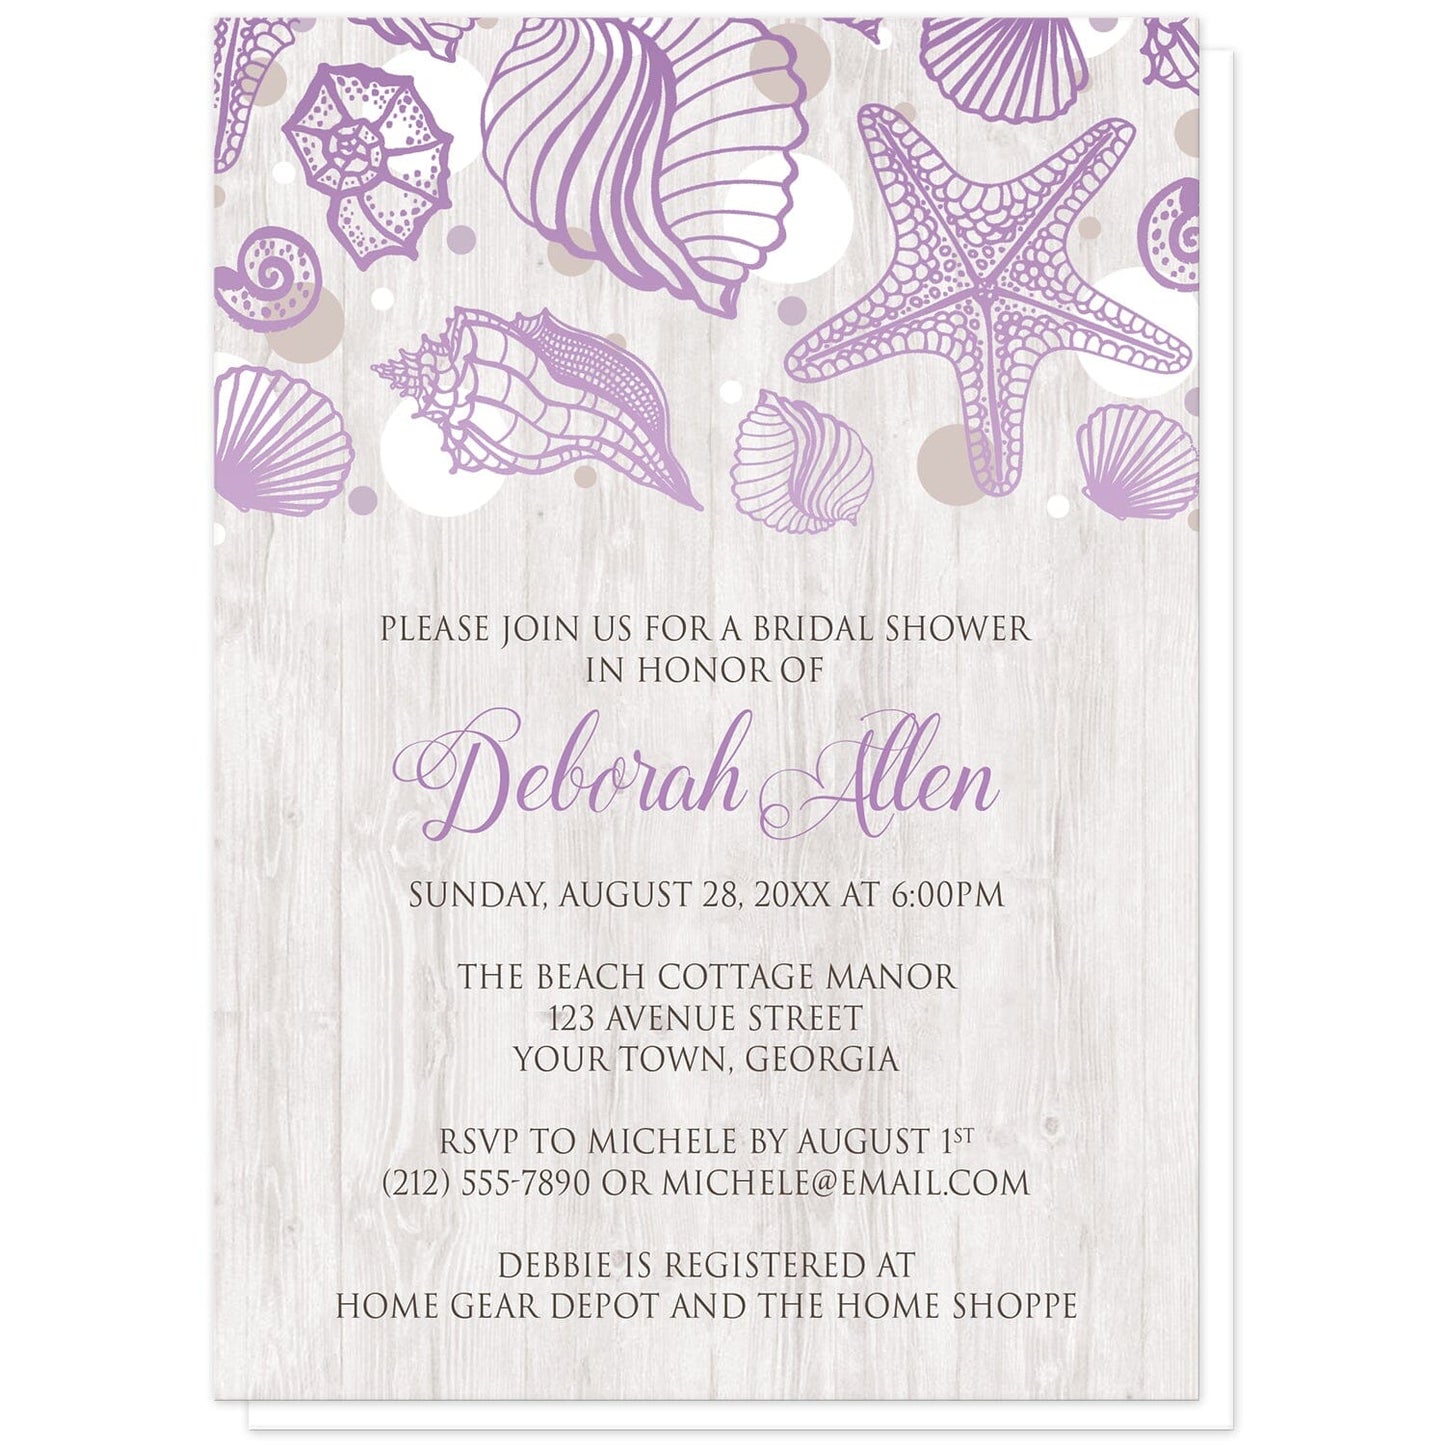 Seashell Whitewashed Wood Purple Beach Bridal Shower Invitations at Artistically Invited. Rustic-chic seashell whitewashed wood purple beach bridal shower invitations with a purple seashell line drawing with accent tan and white dots over a light whitewashed wood illustration. Your personalized bridal shower celebration details are custom printed in tan and brown over the whitewashed wood background below the seashells.